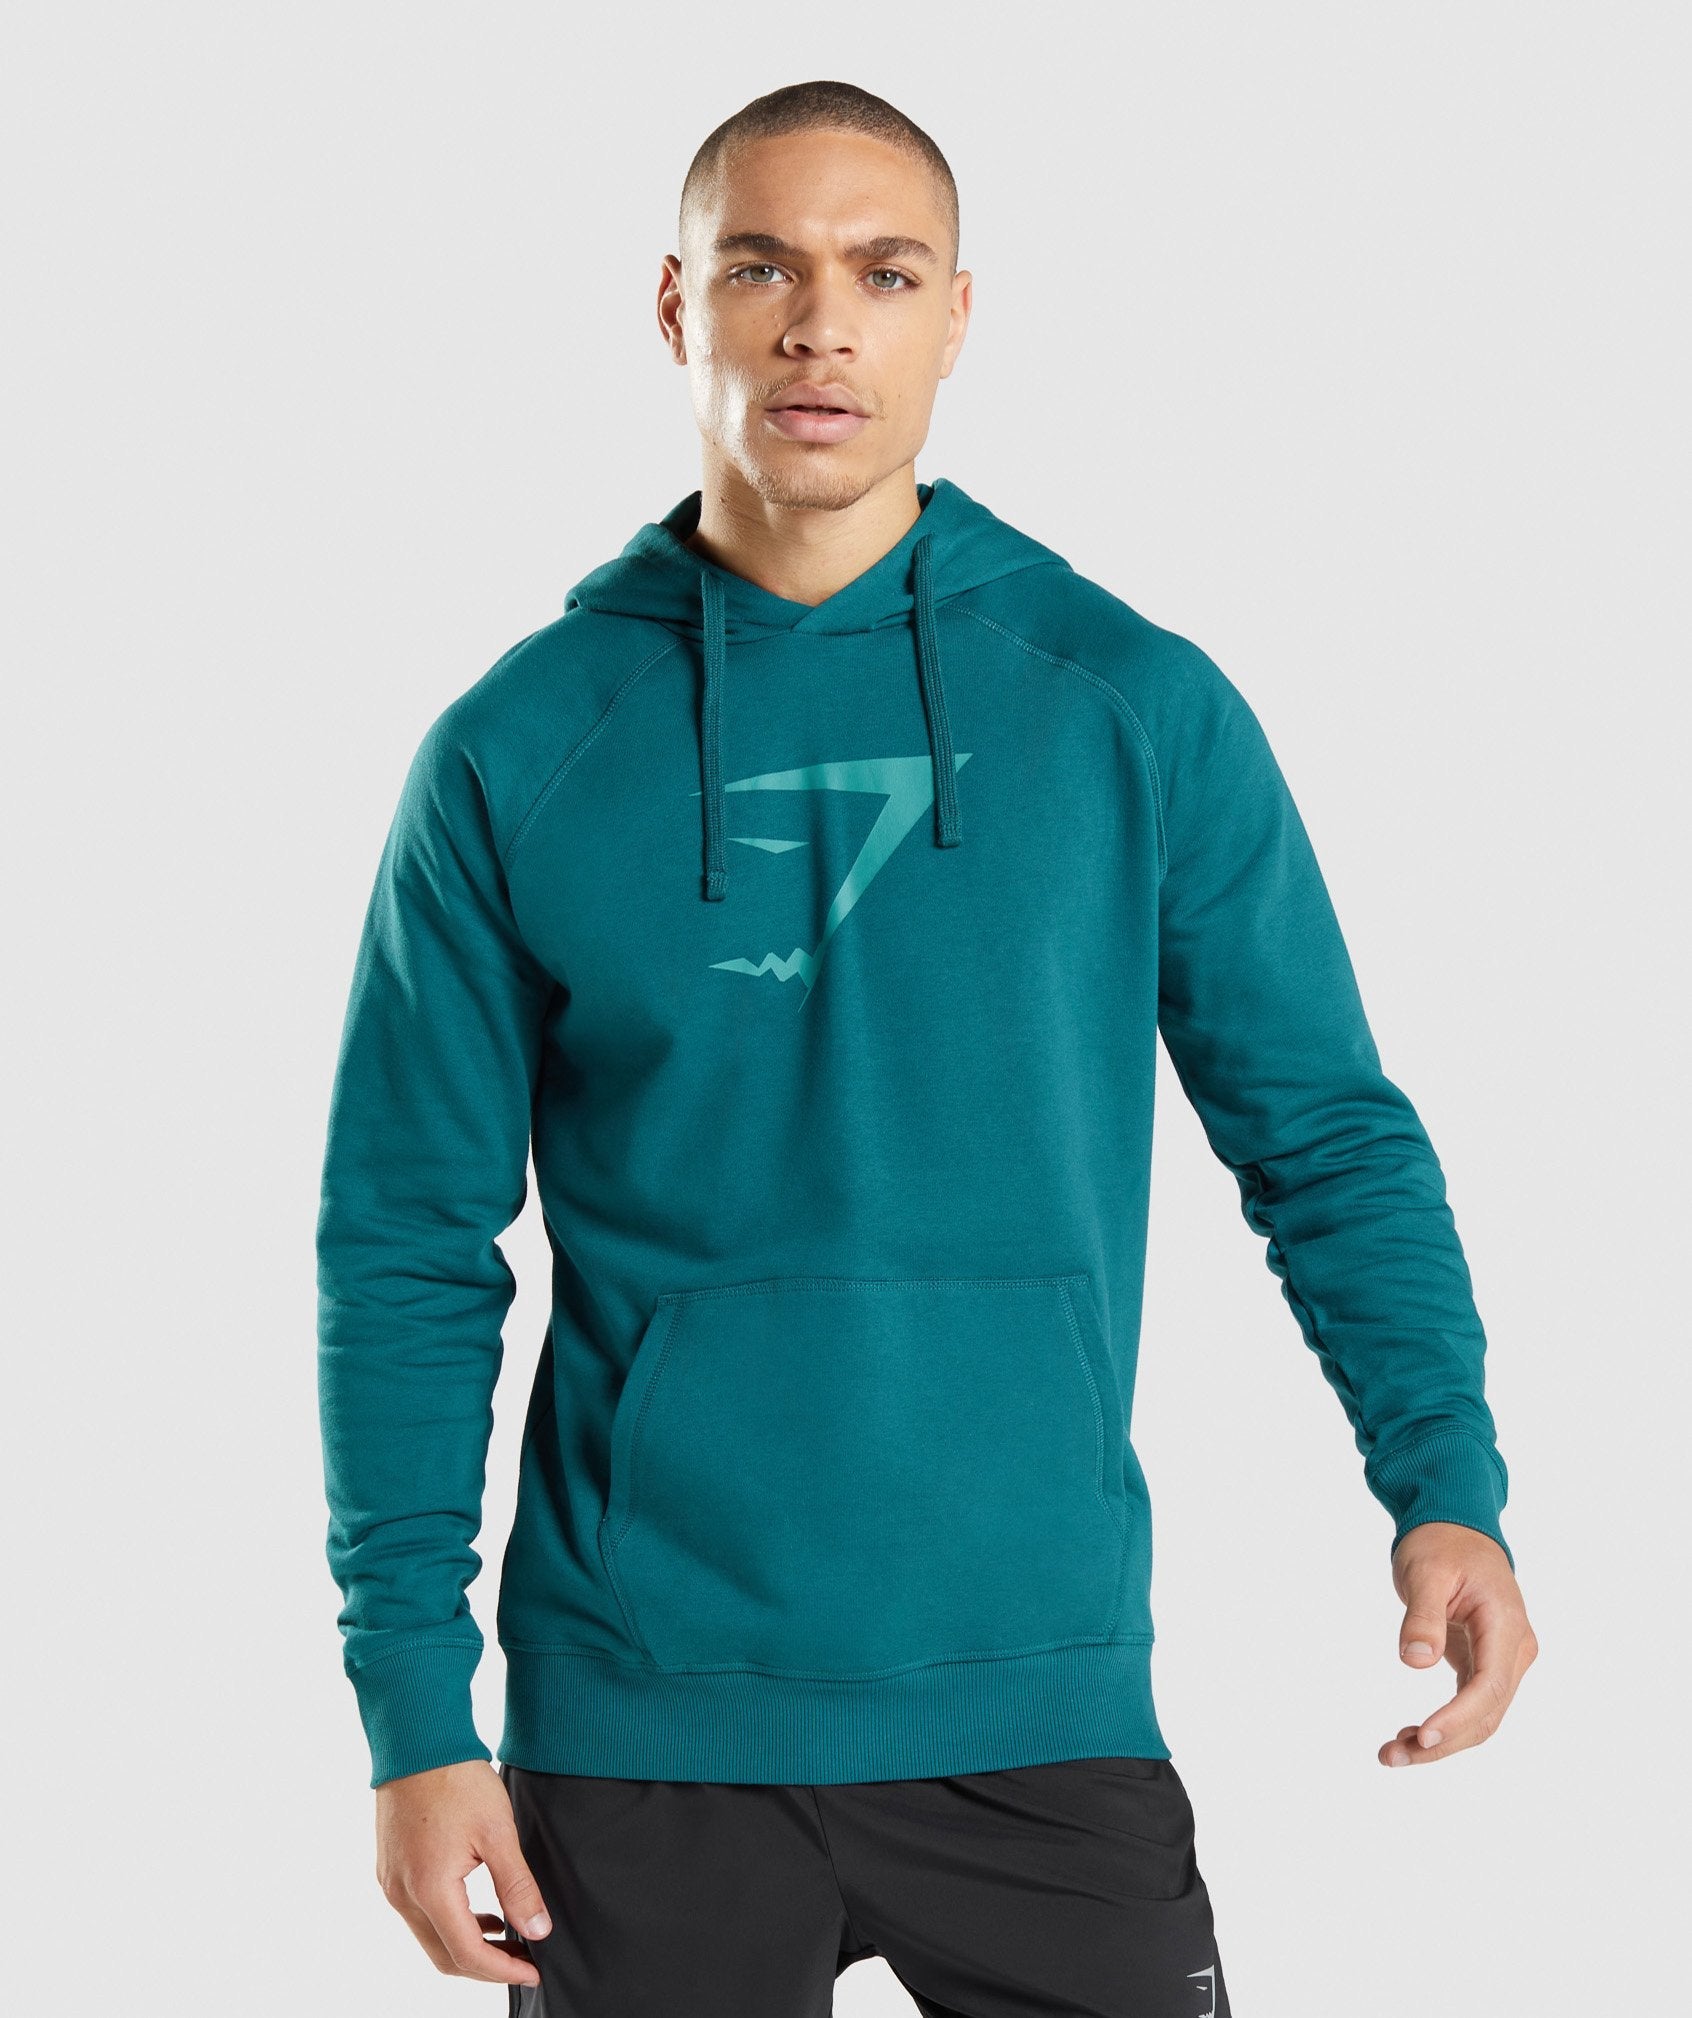 Sharkhead Infill Hoodie in Teal - view 1